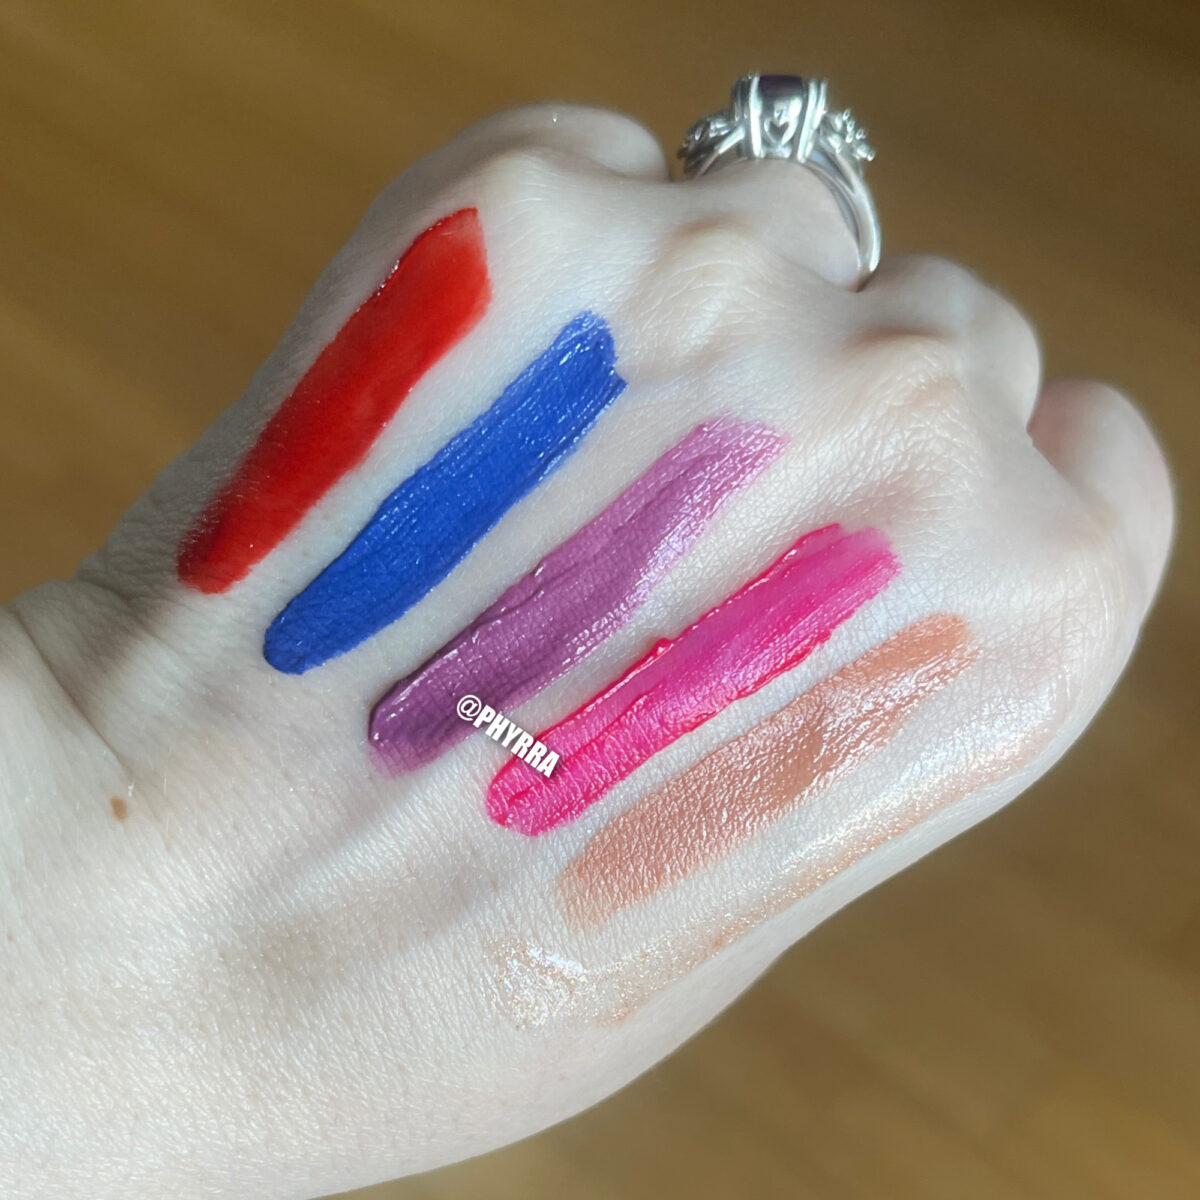 Half-Magic Beauty Mouth Cloud Swatches on Light Skin